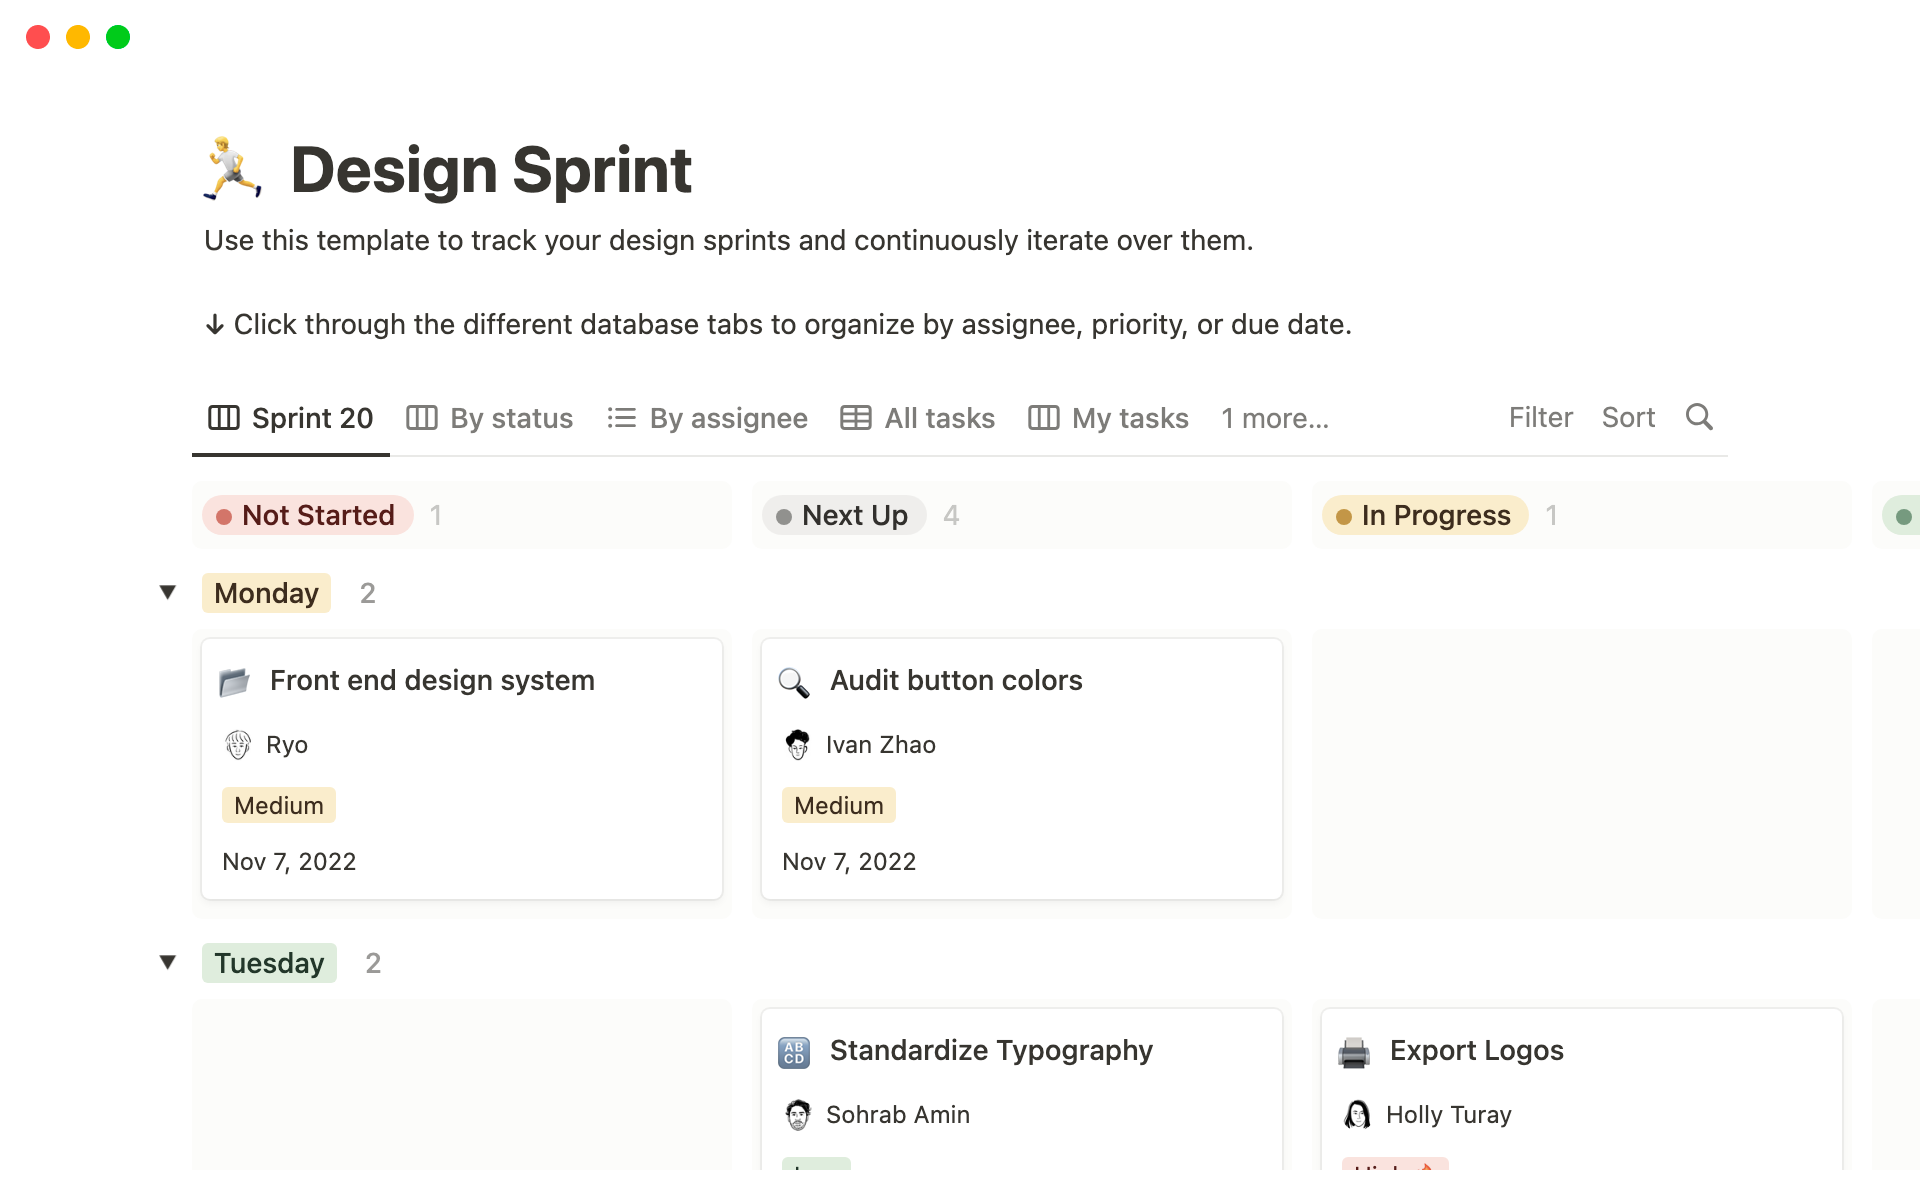 This template is designed to help design teams continuously track and iterate on their projects, from creative sprints to finished projects based on user feedback.